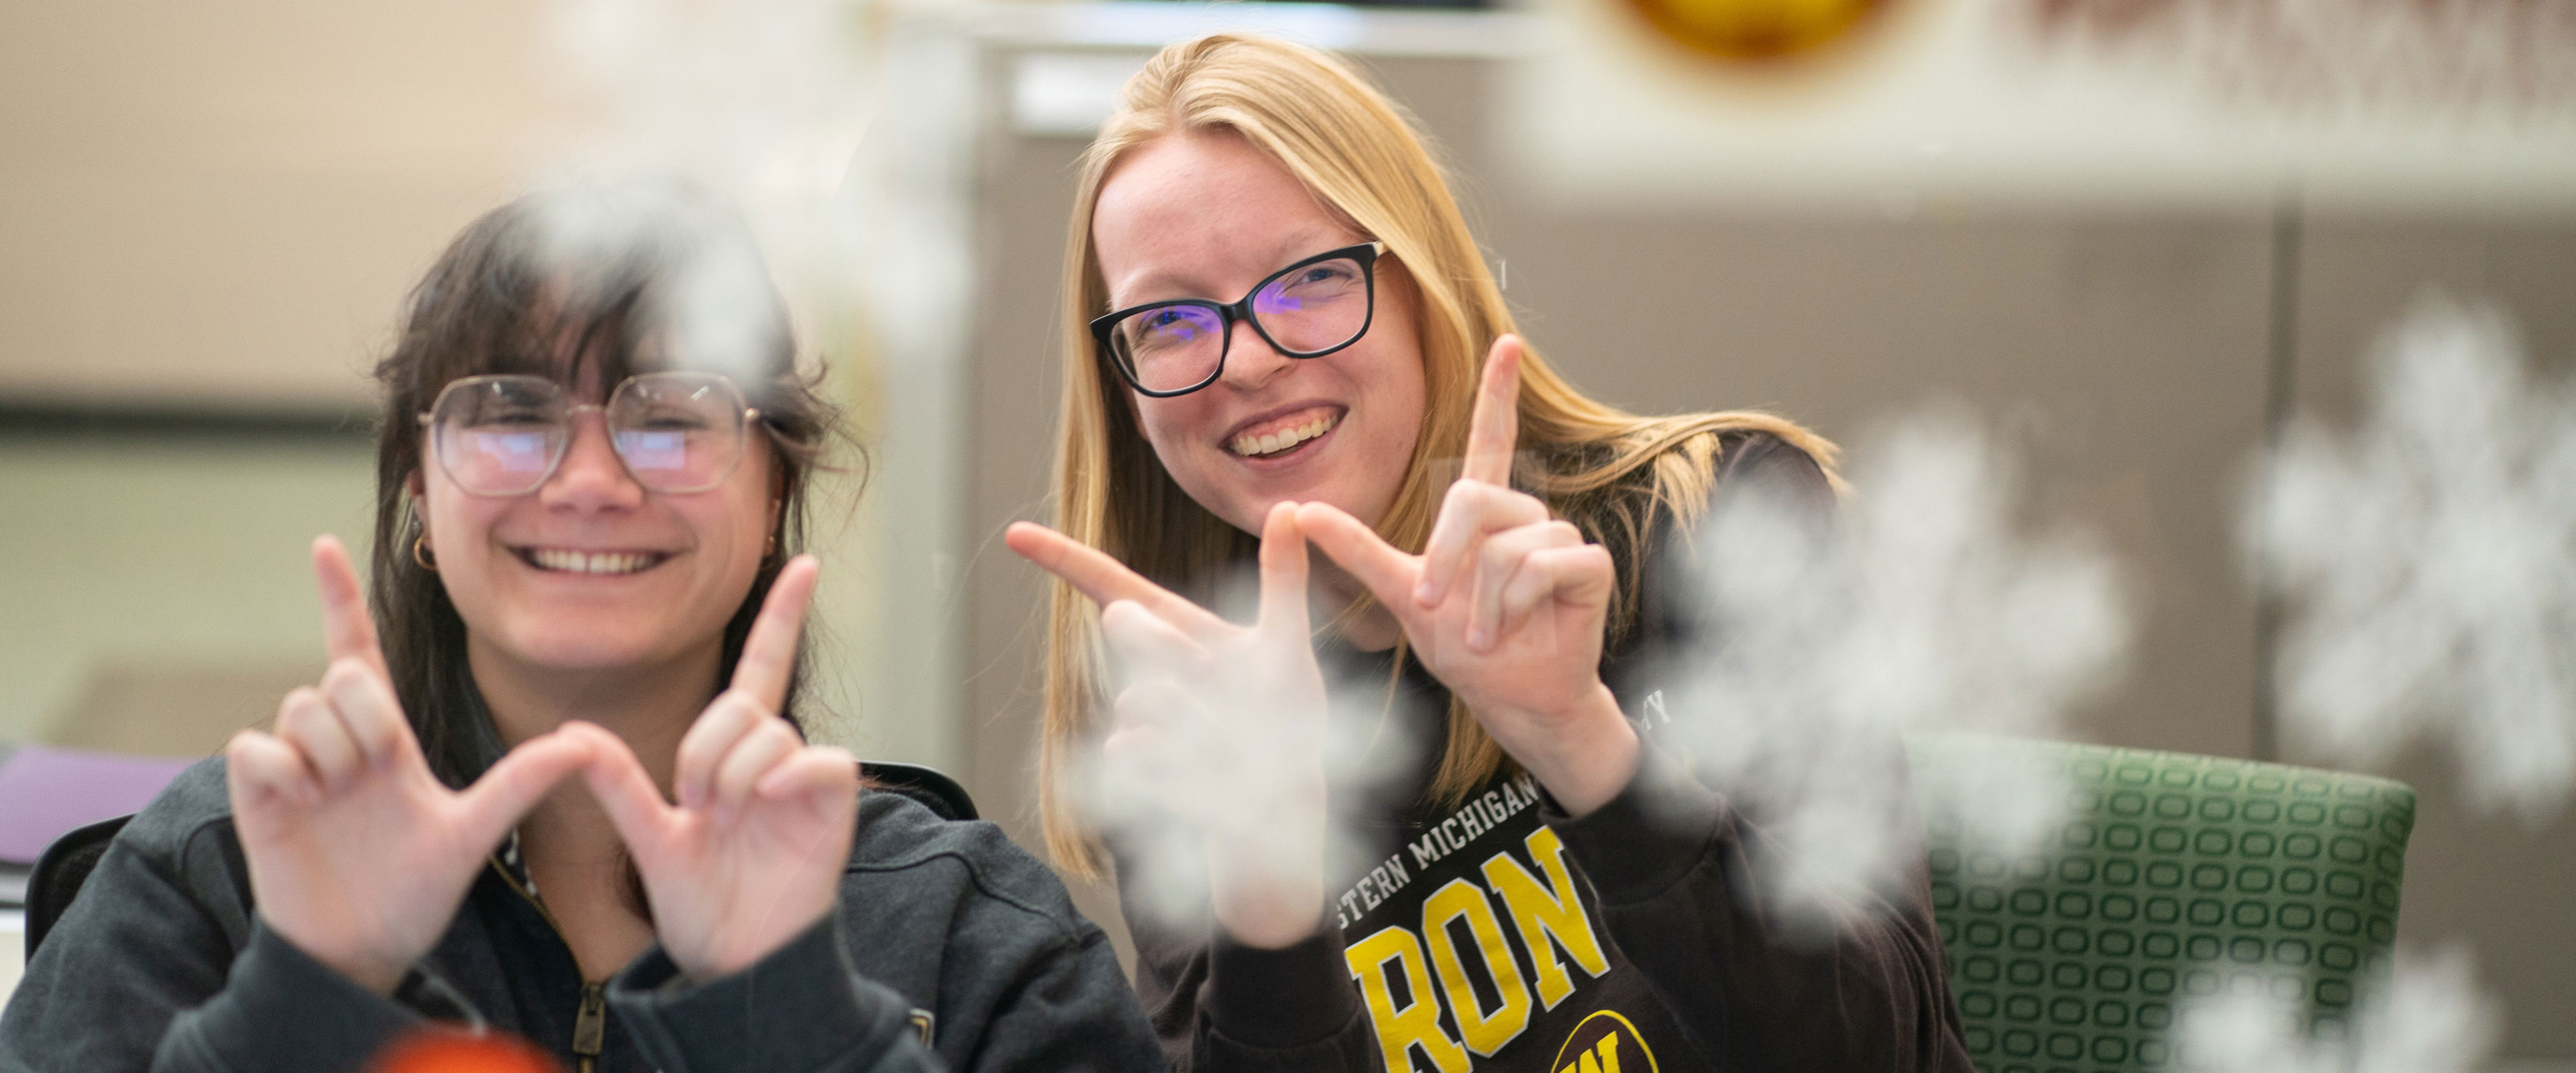 Two smiling students displaying a W formed with their fingers